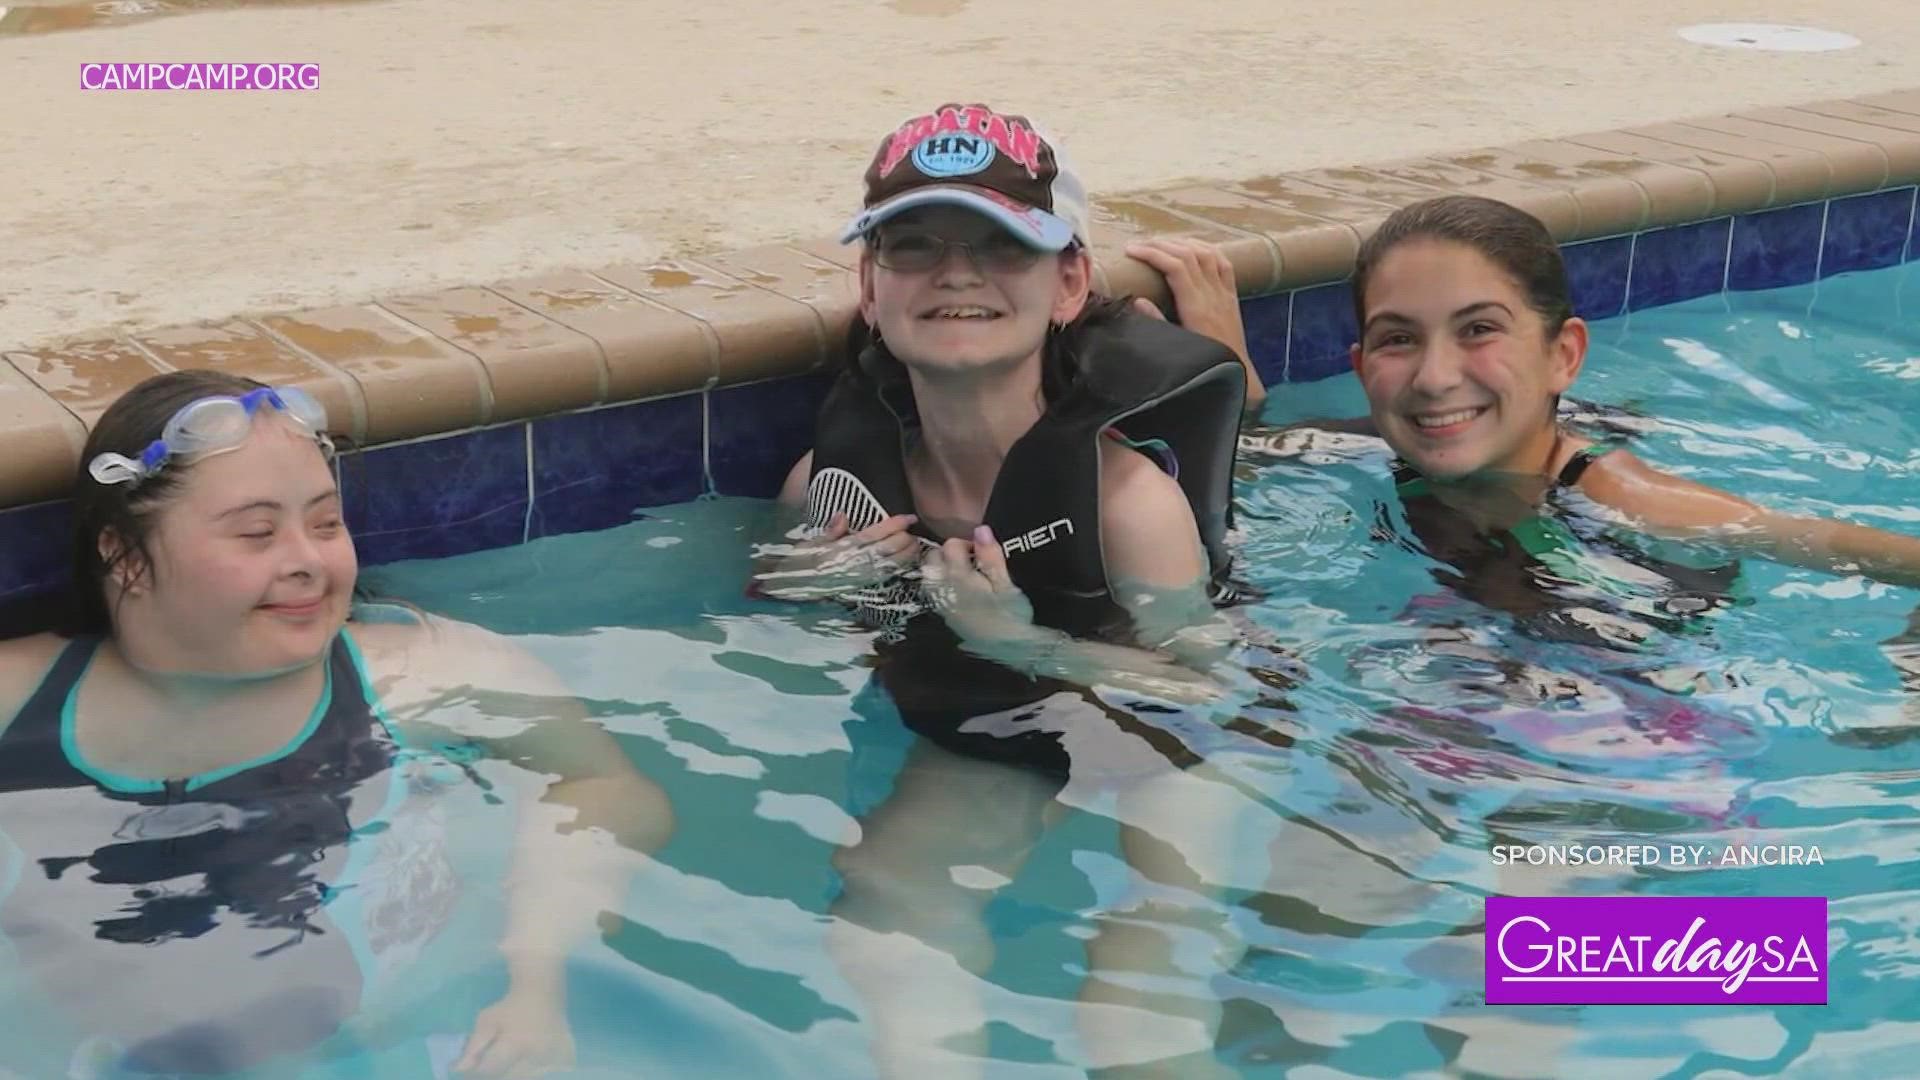 Good People - Summer Camp for children with disabilities